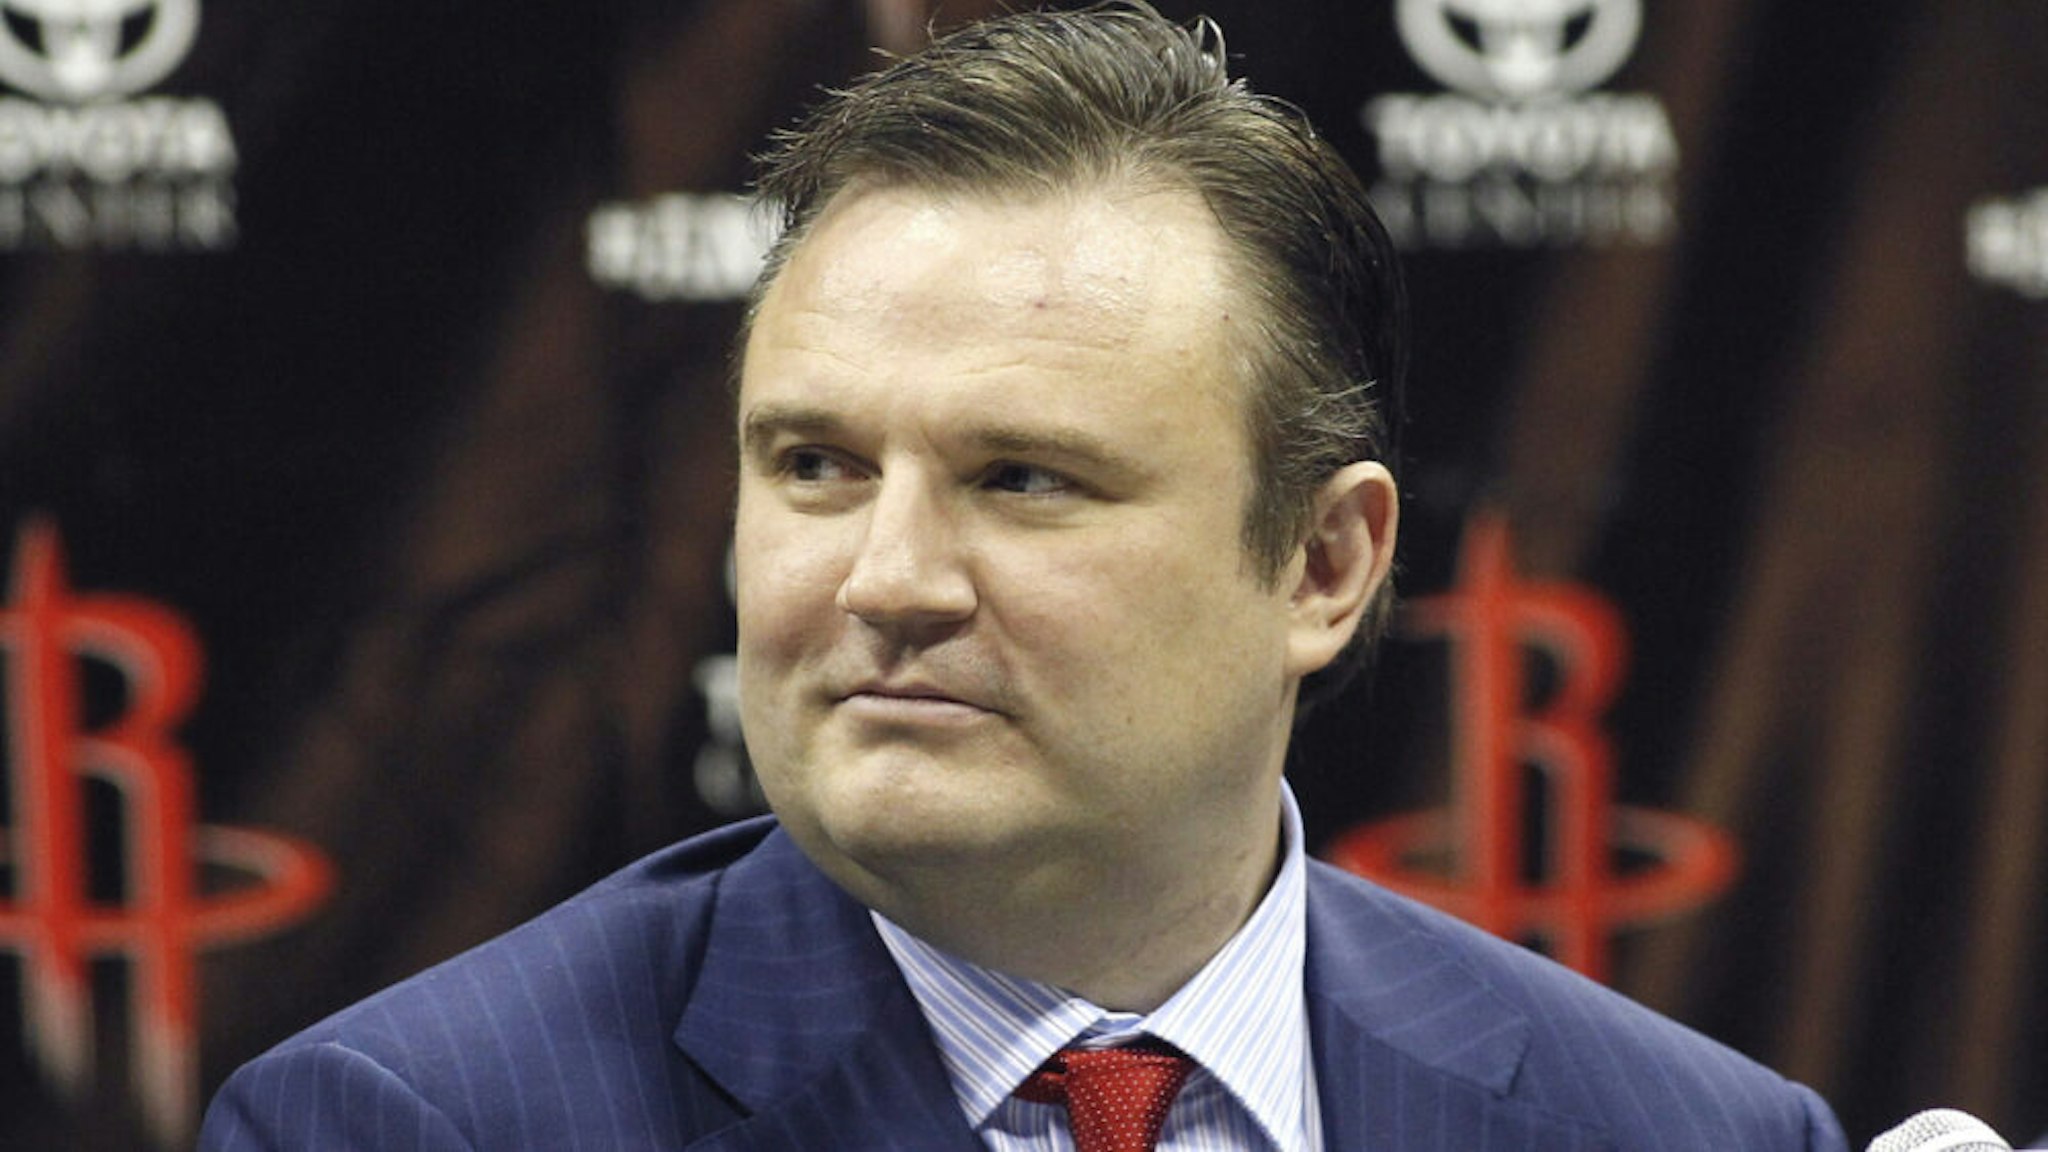 HOUSTON, TX - JULY 13: Houston Rockets general manager Daryl Morey listens as Dwight Howard is officially introduced as a Houston Rocket during a press conference on July 13, 2013 in Houston, Texas.